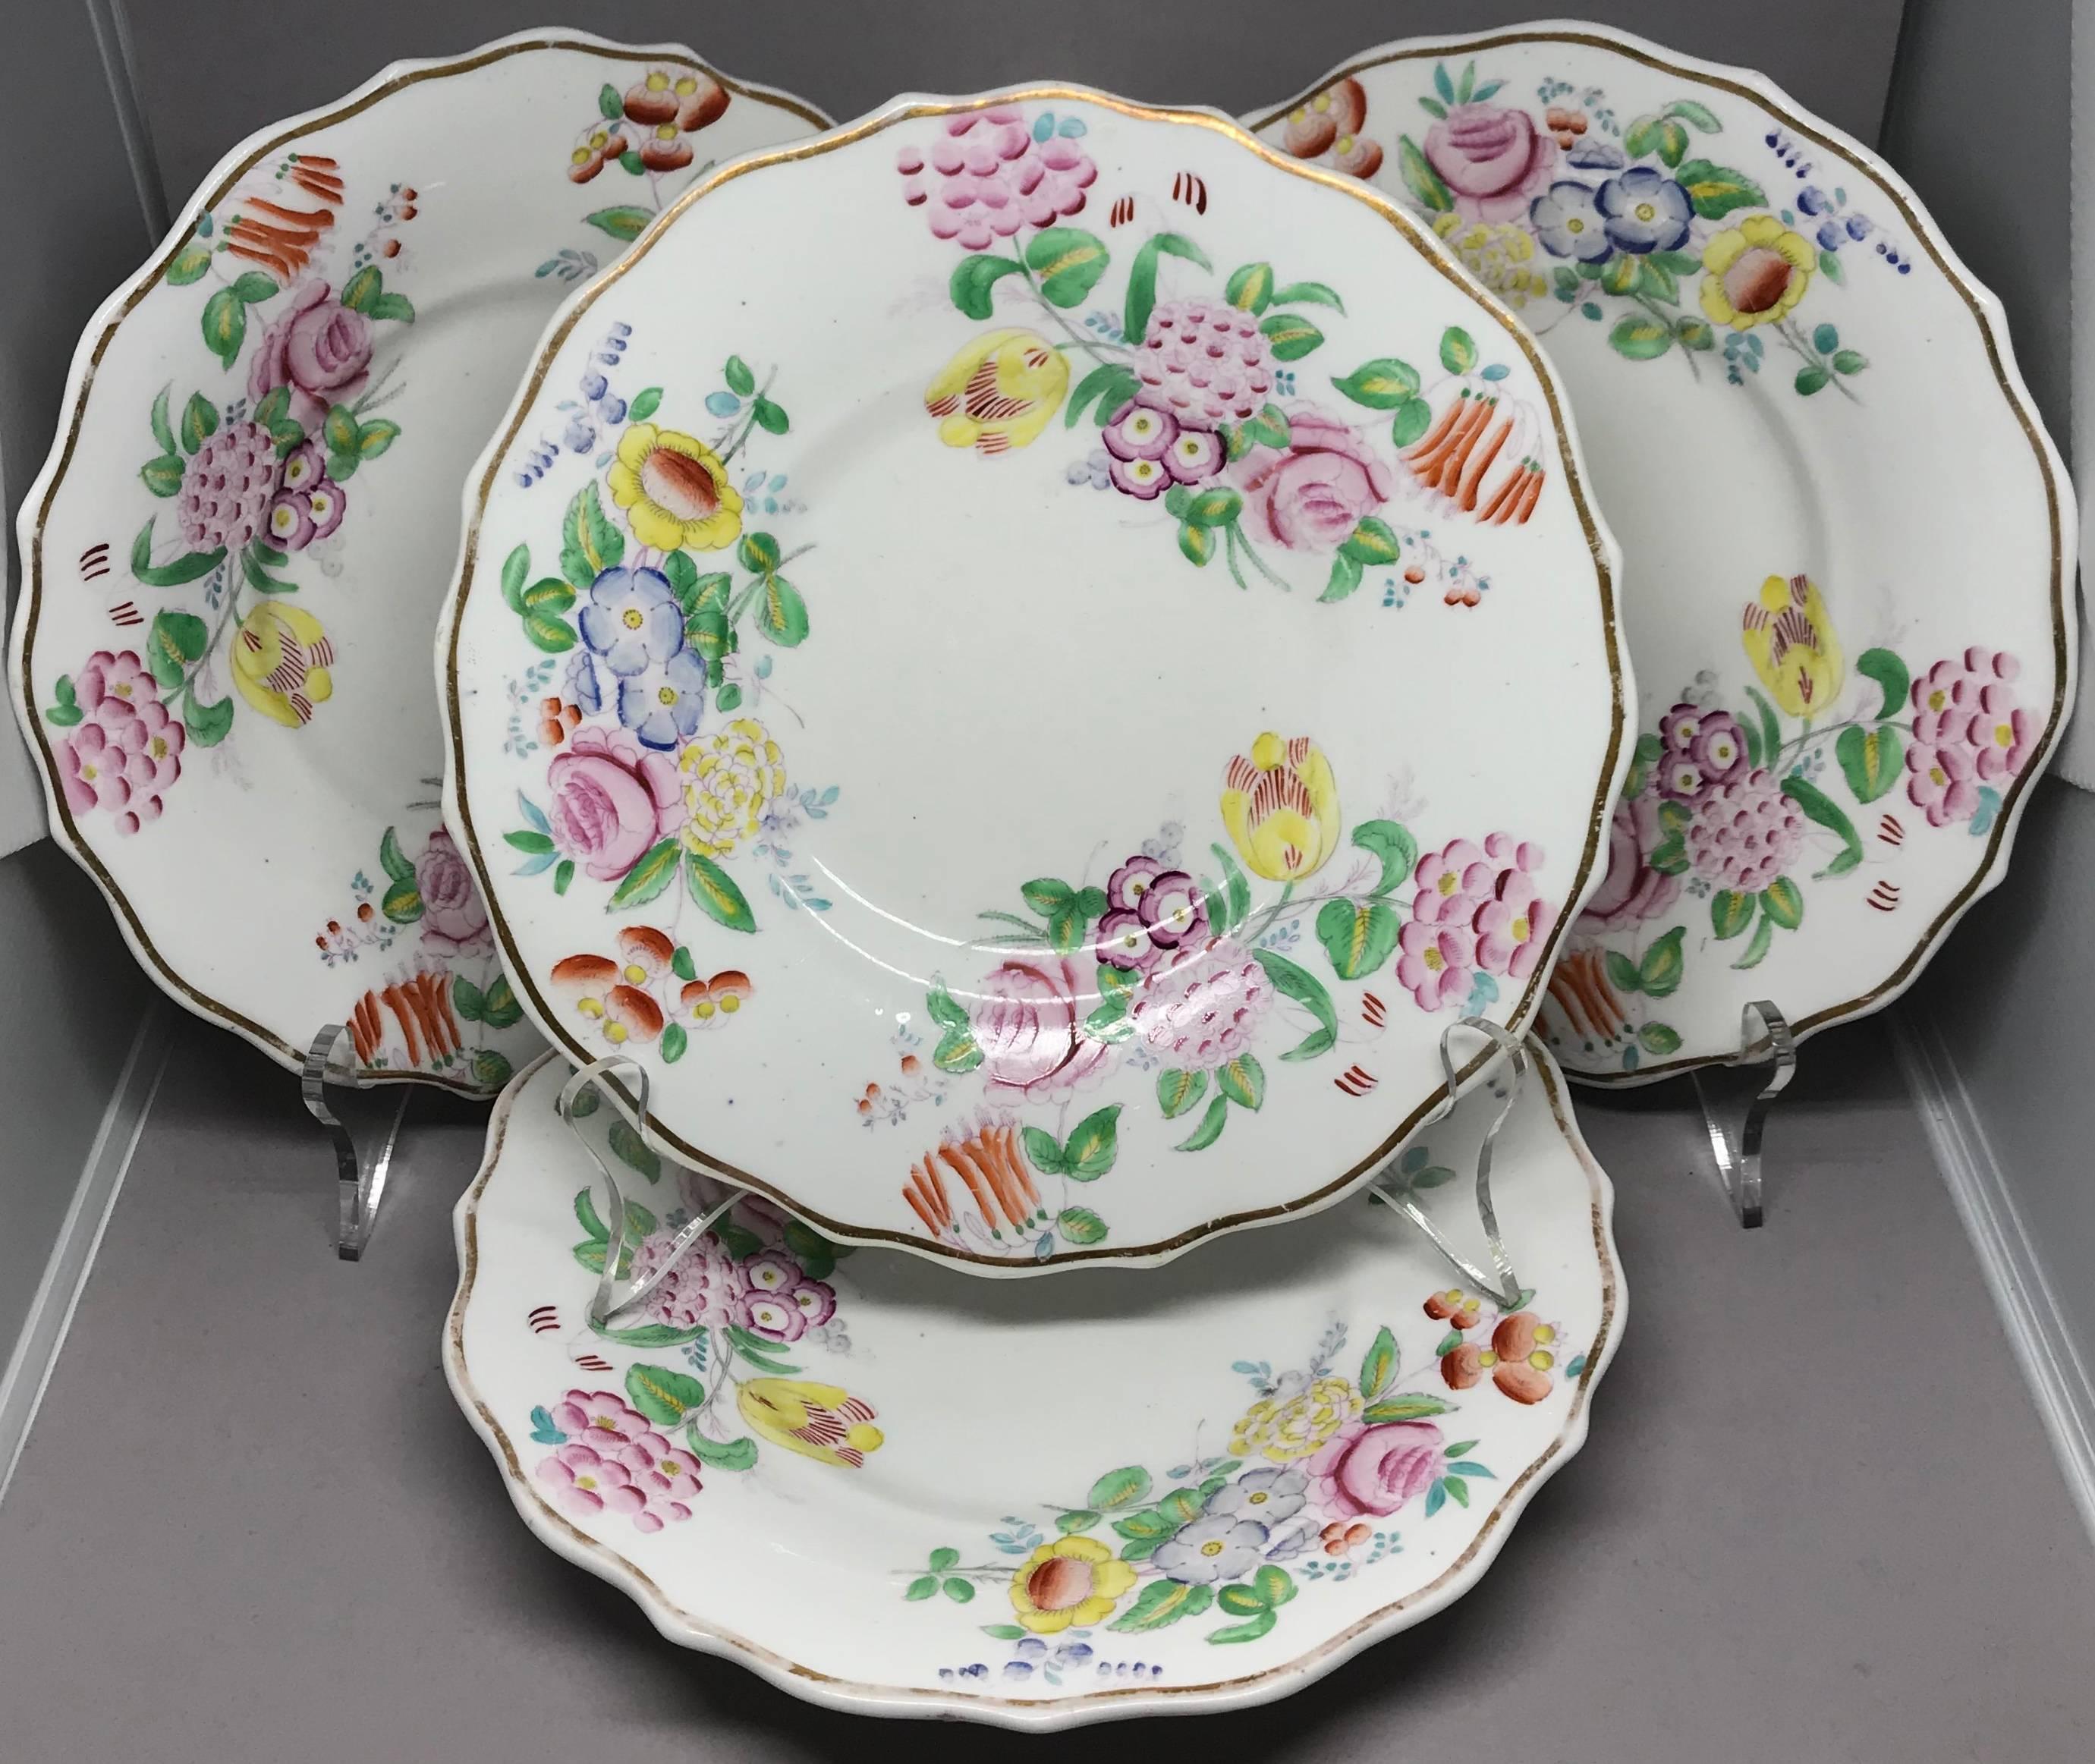 Set of four English gilt-edged floral plates.  Set of four luncheon/dessert plates with gilt scalloped rims and hand-painted floral sprays. Beautiful Easter / hostess gift.  England, circa 1840s. 
Dimension: 8.75